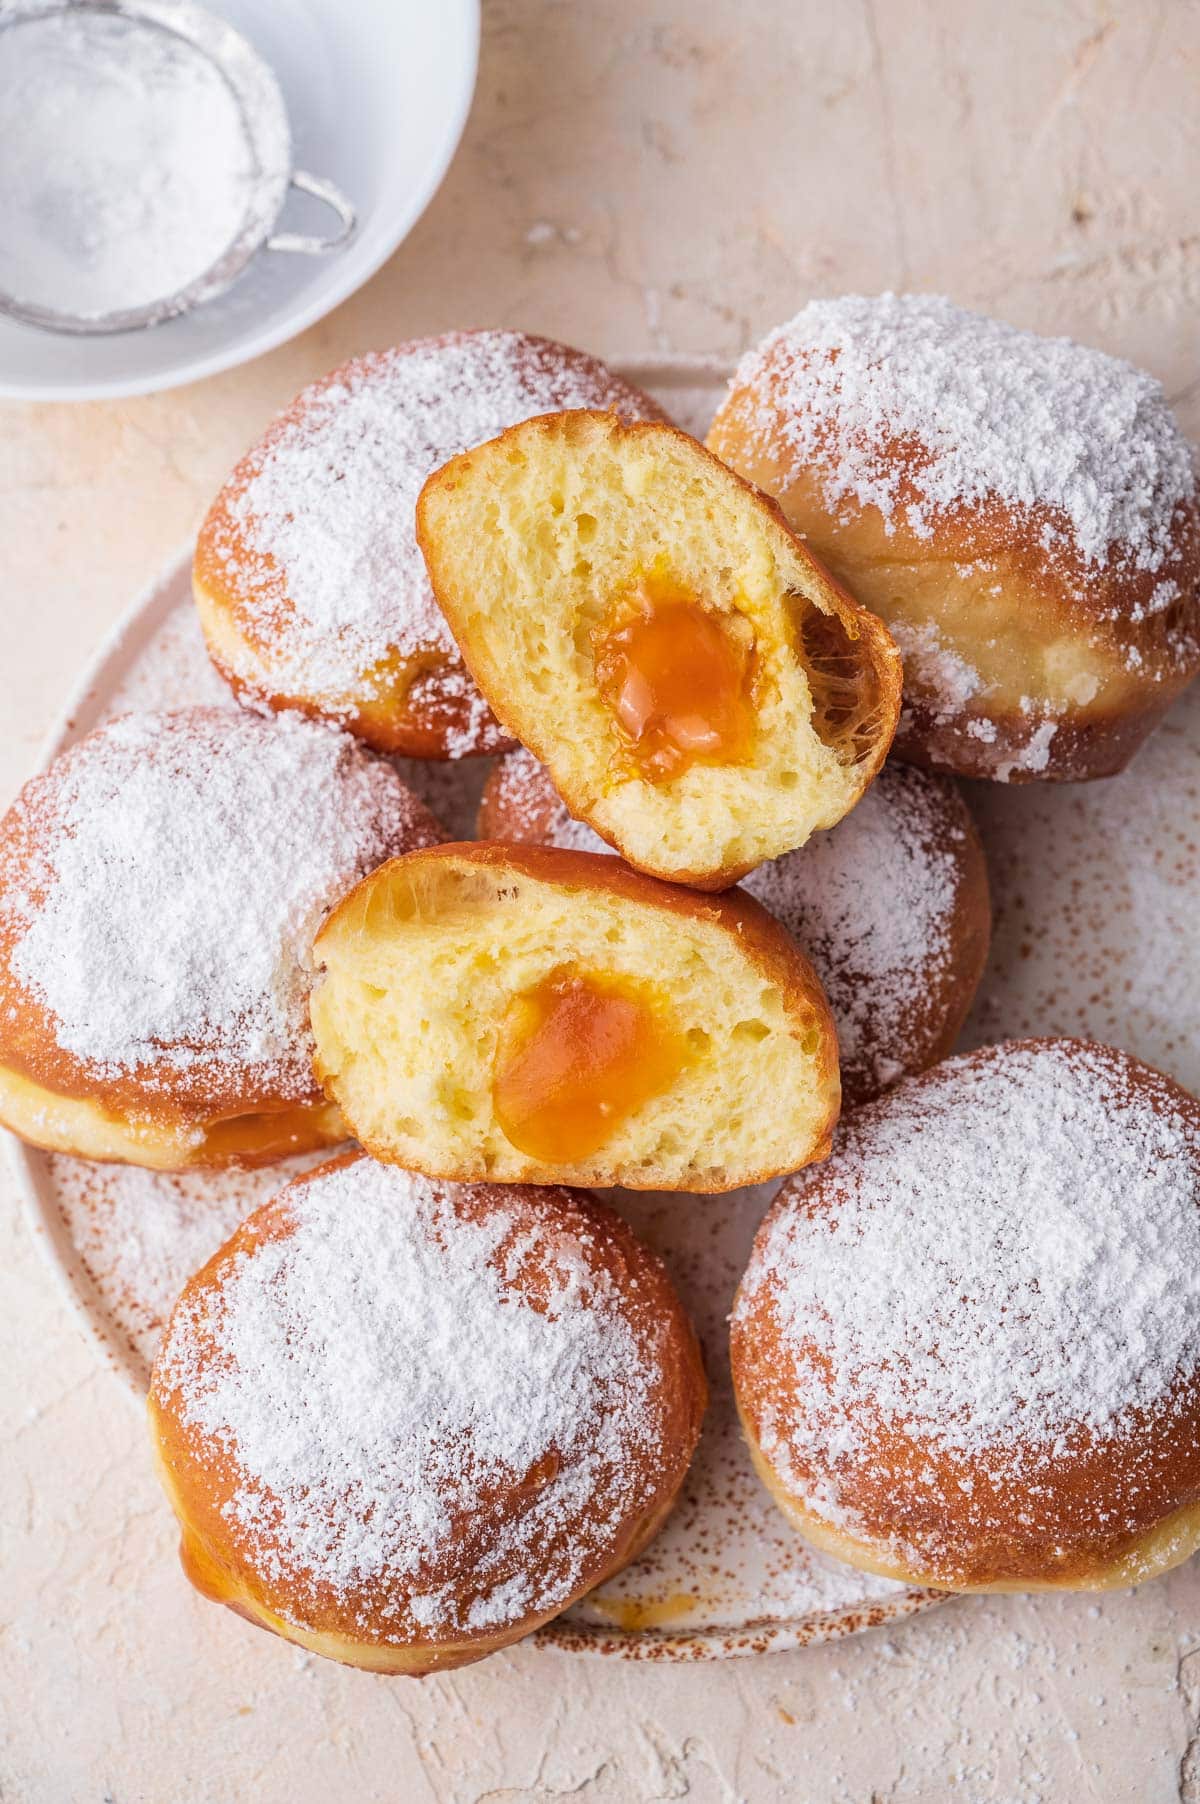 Krapfen dusted with powdered sugar on a white plate. One Krapfen is cut in half.